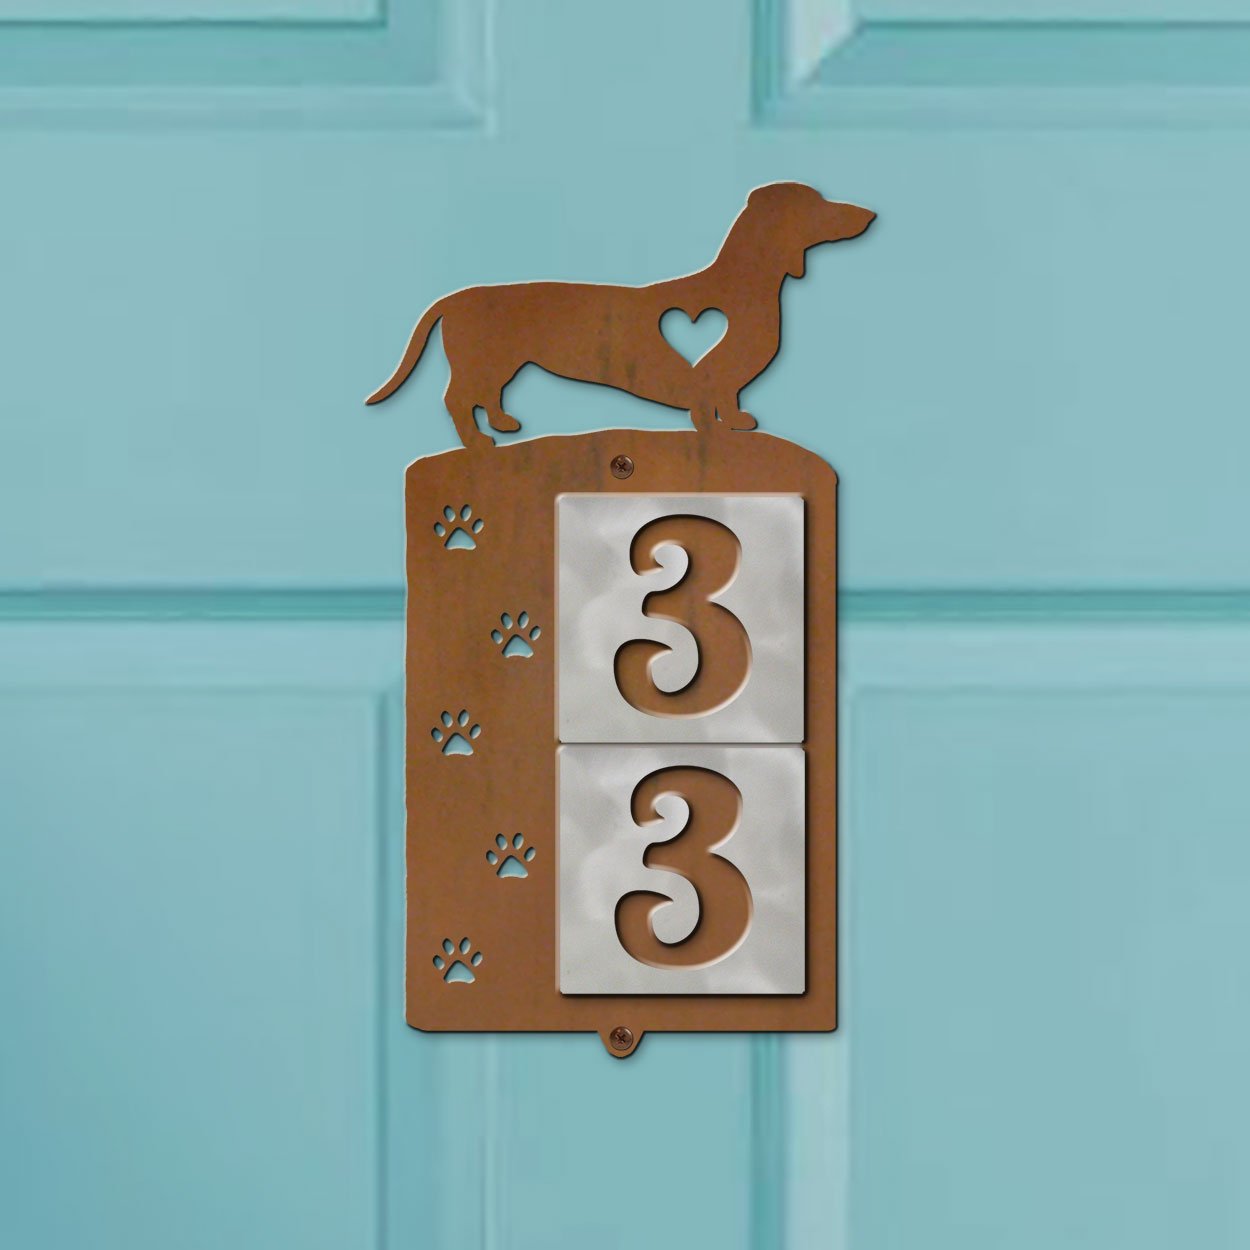 606182 - Dachshund Nose Prints 2-Digit Vertical Tile Apartment Numbers